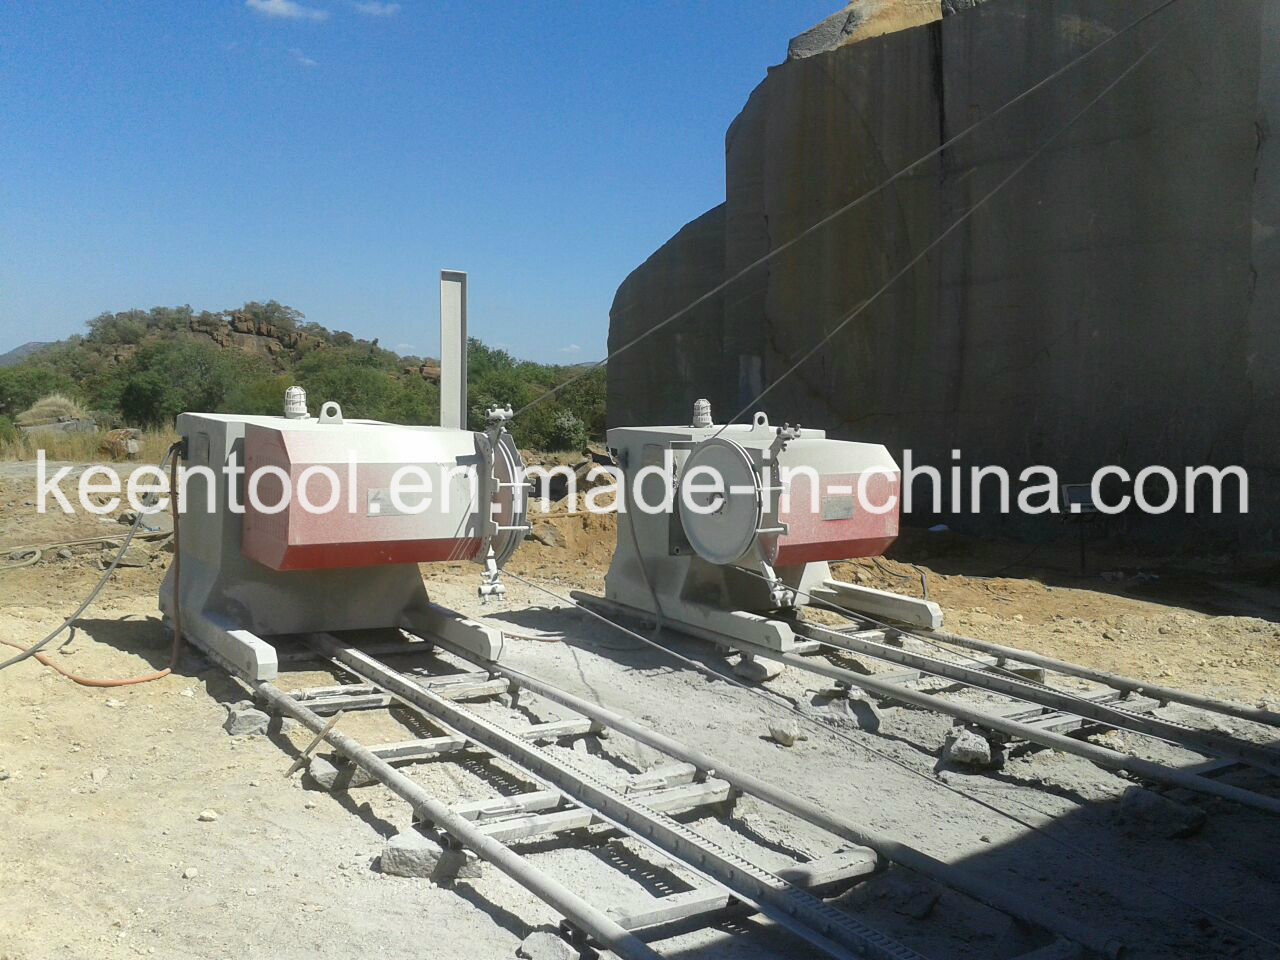 75kws/100HP Electrical Drive Wire Saw Machine for Mining or Quarry of Granite Marble Limestone Sandstone Travertine and Slate